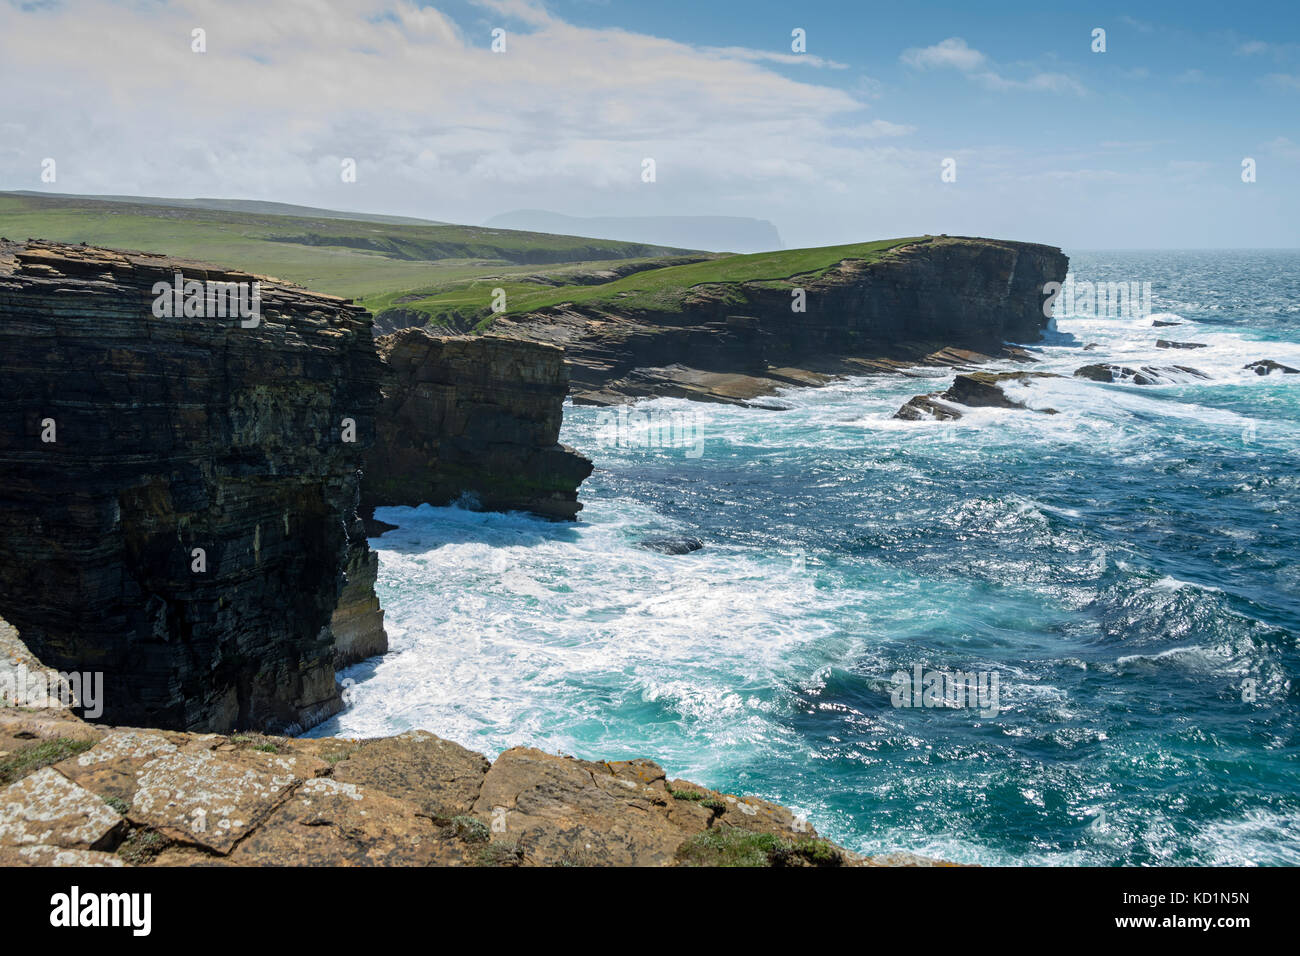 The Brough of Bigging at Yesnaby, Orkney Mainland, Scotland, UK. Stock Photo